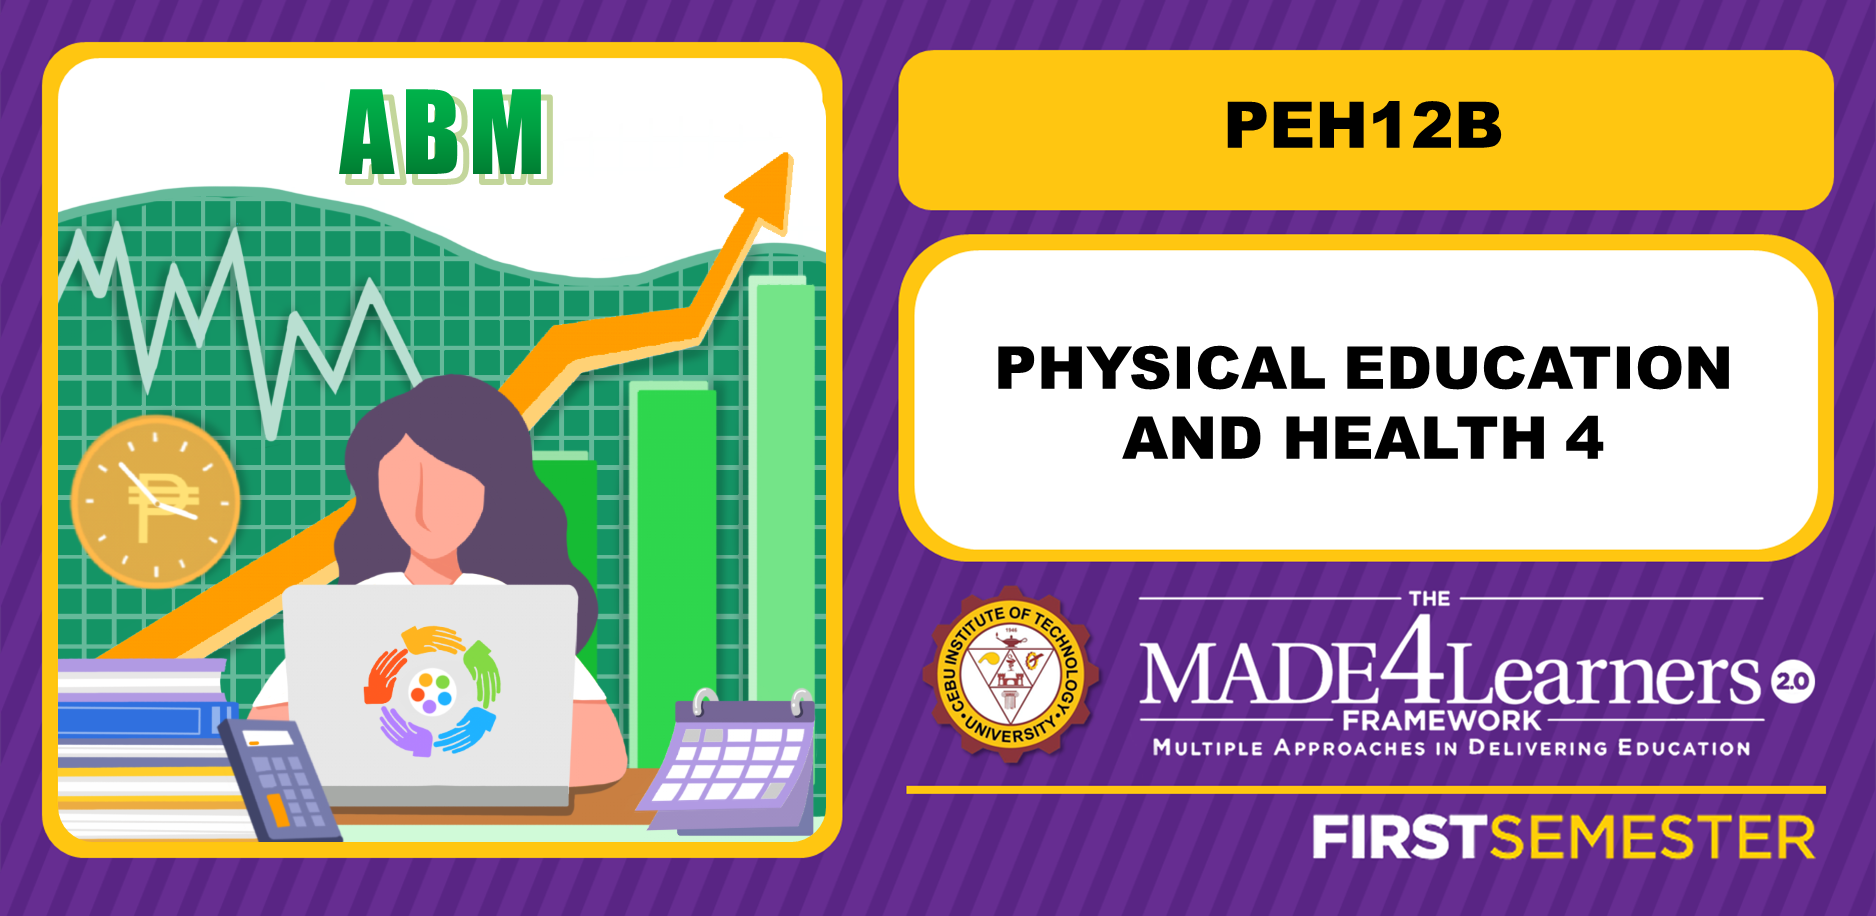 PEH12B: Physical Education and Health 4